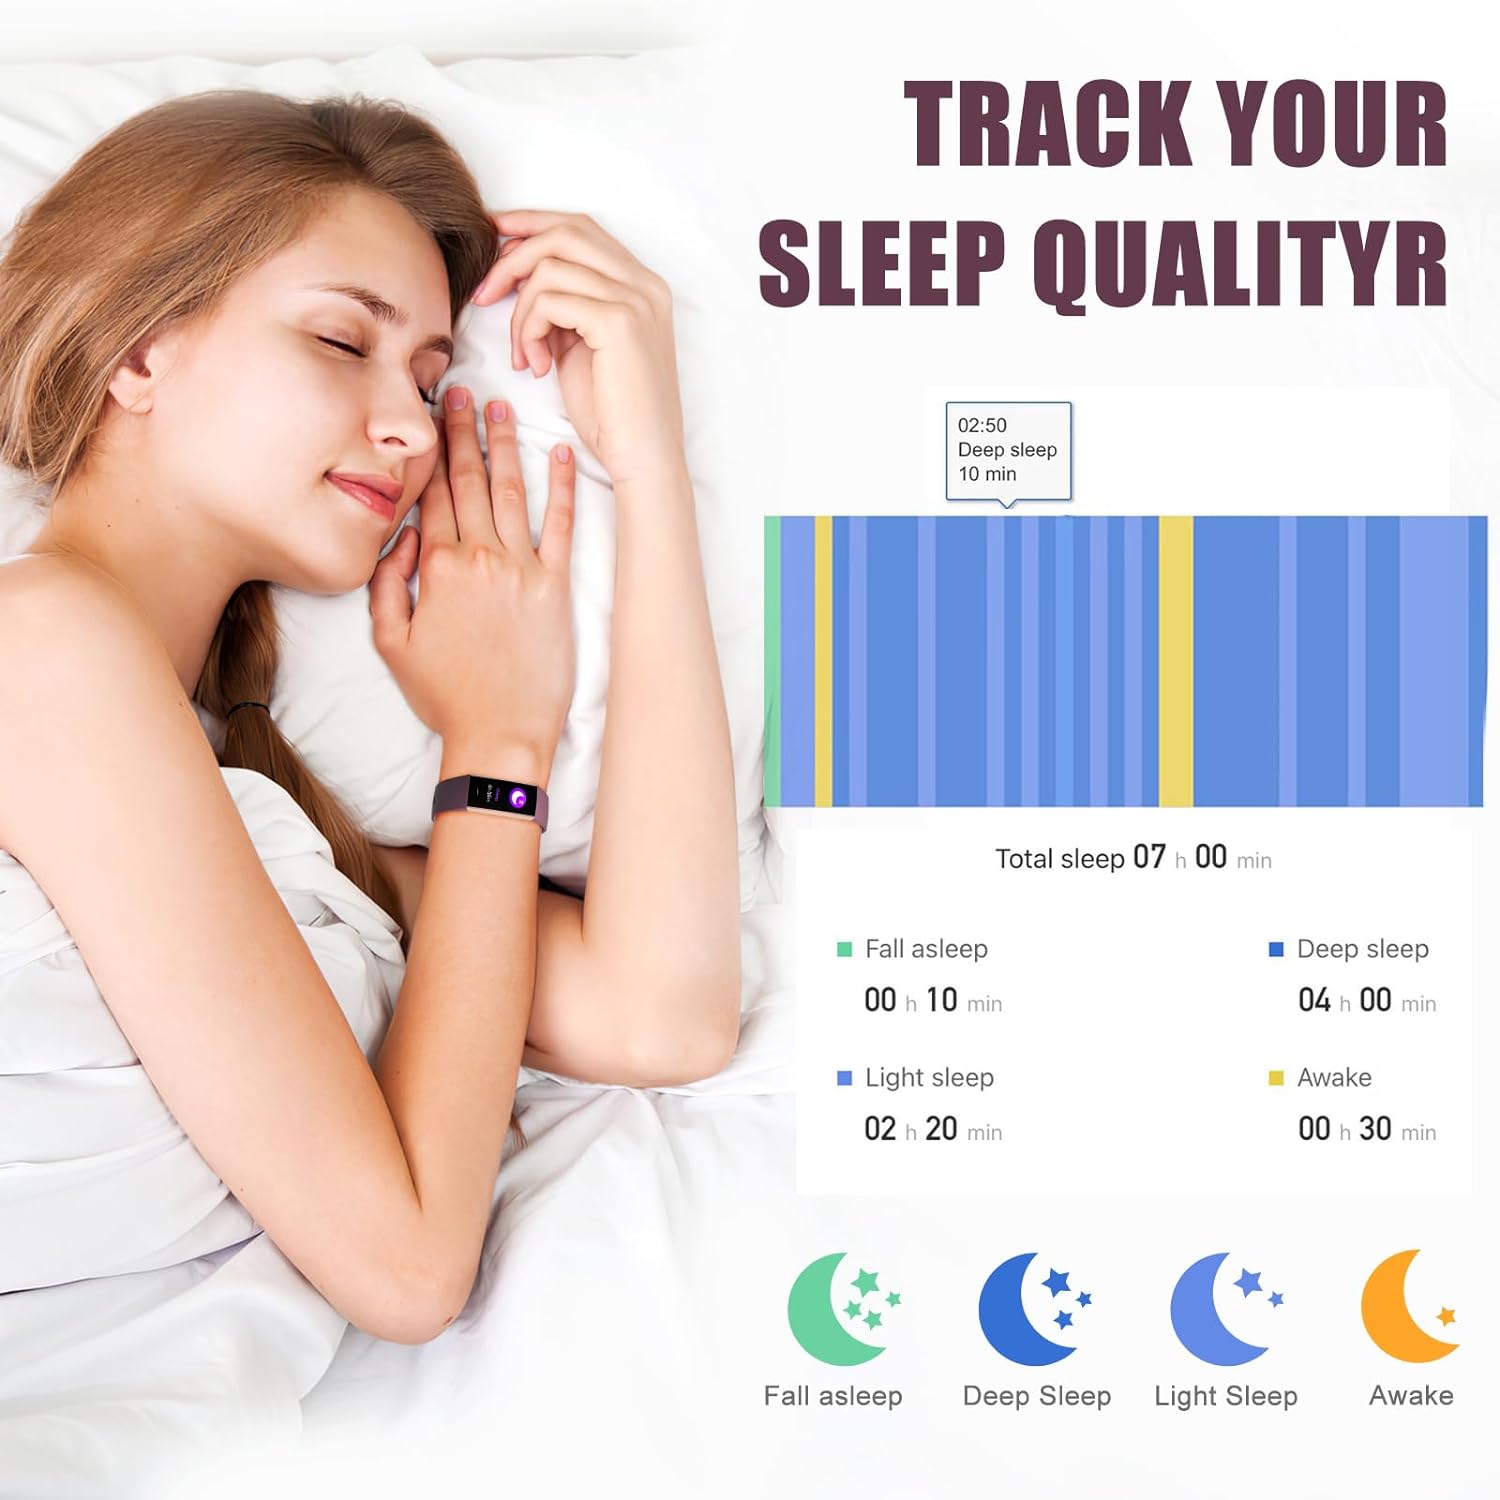 Fitness Tracker, Step Counter, Sleep Monitor, Calorie Tracking, Activity Tracker with 1.1